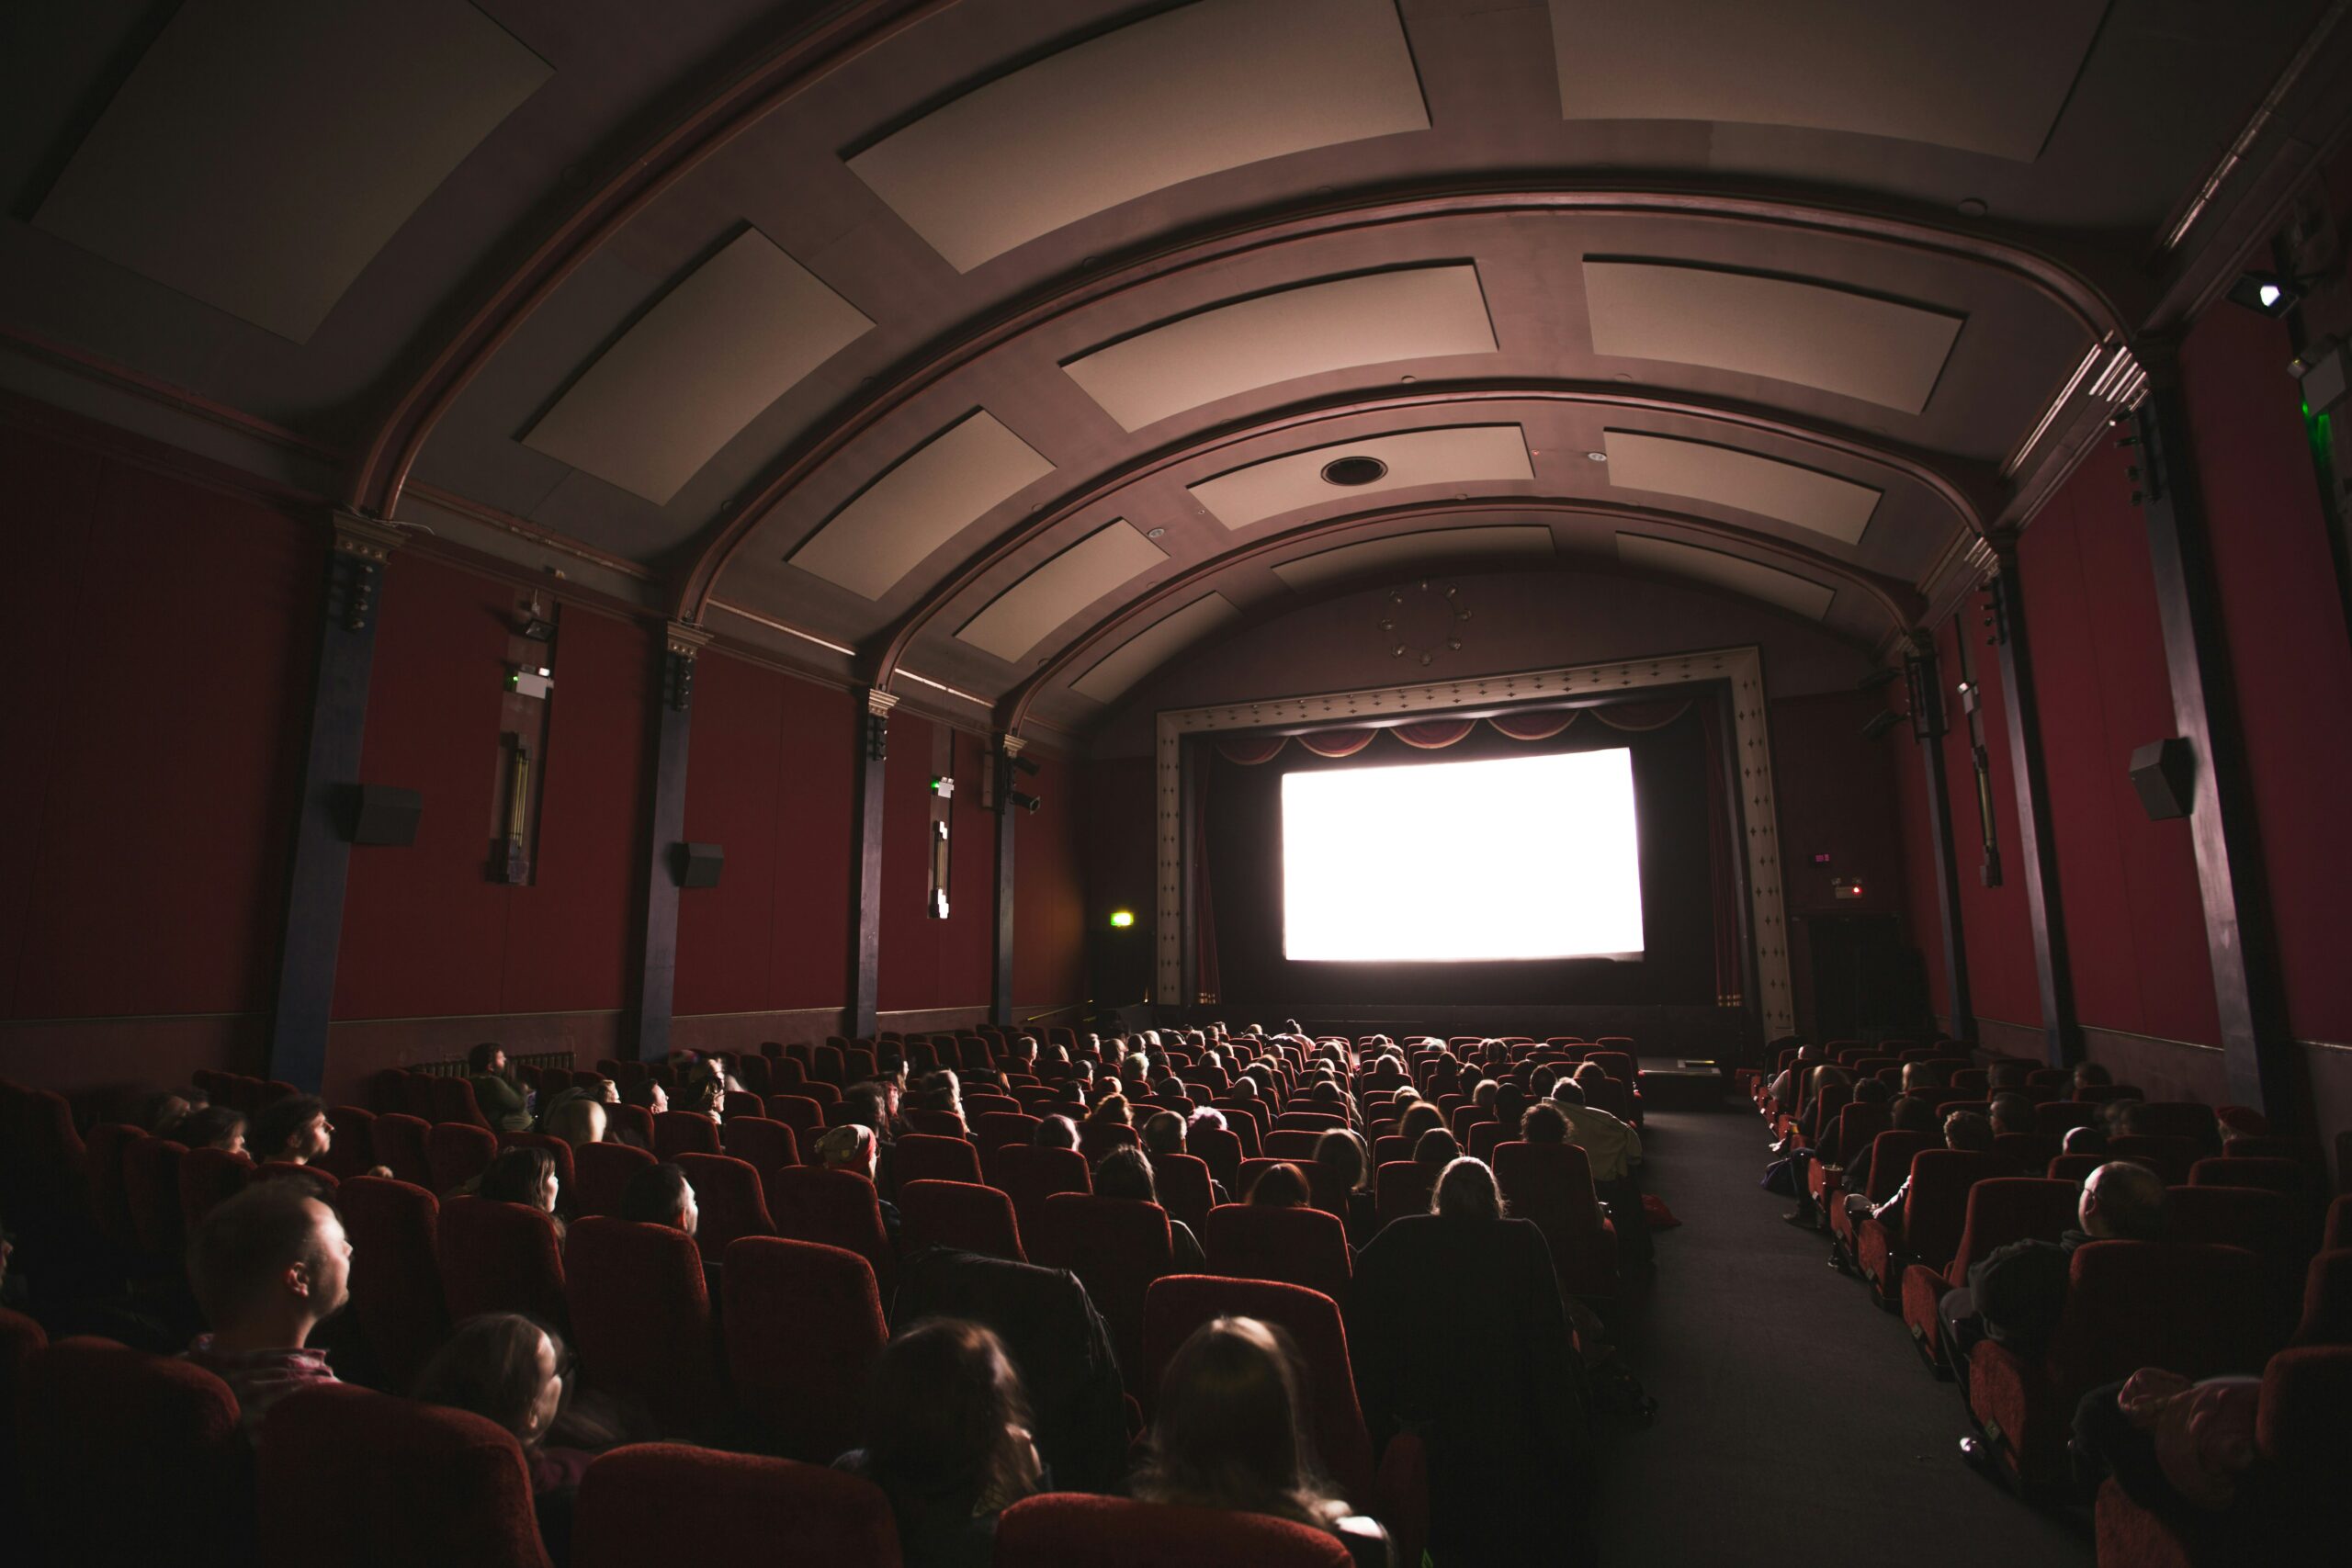 Cinema screen with full audience